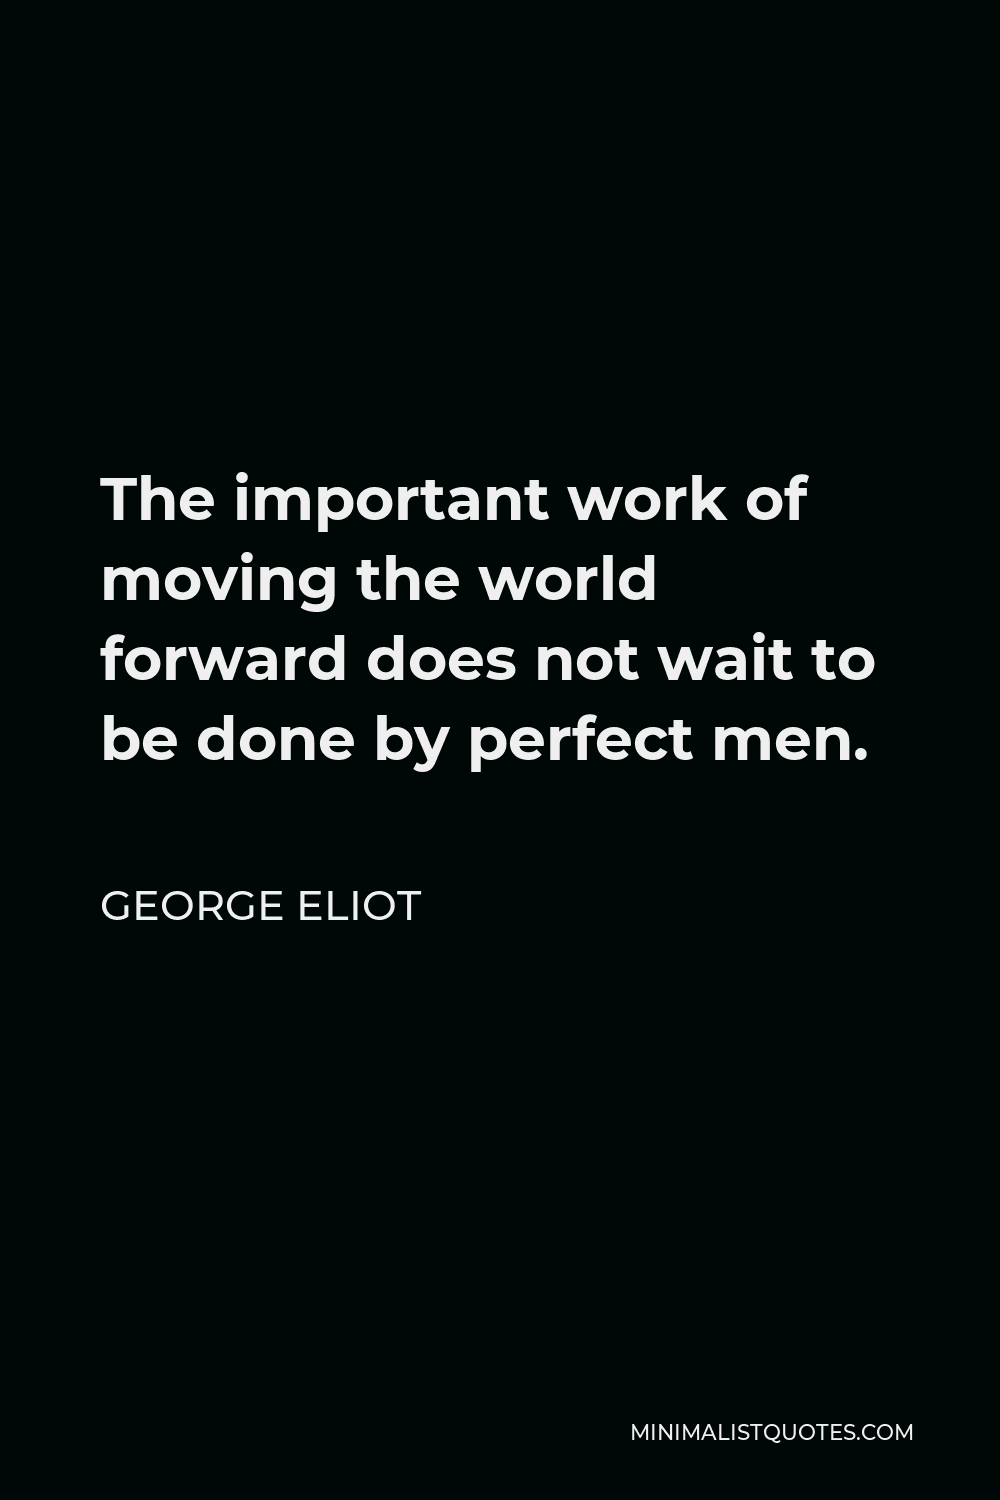 George Eliot Quote - The important work of moving the world forward does not wait to be done by perfect men.